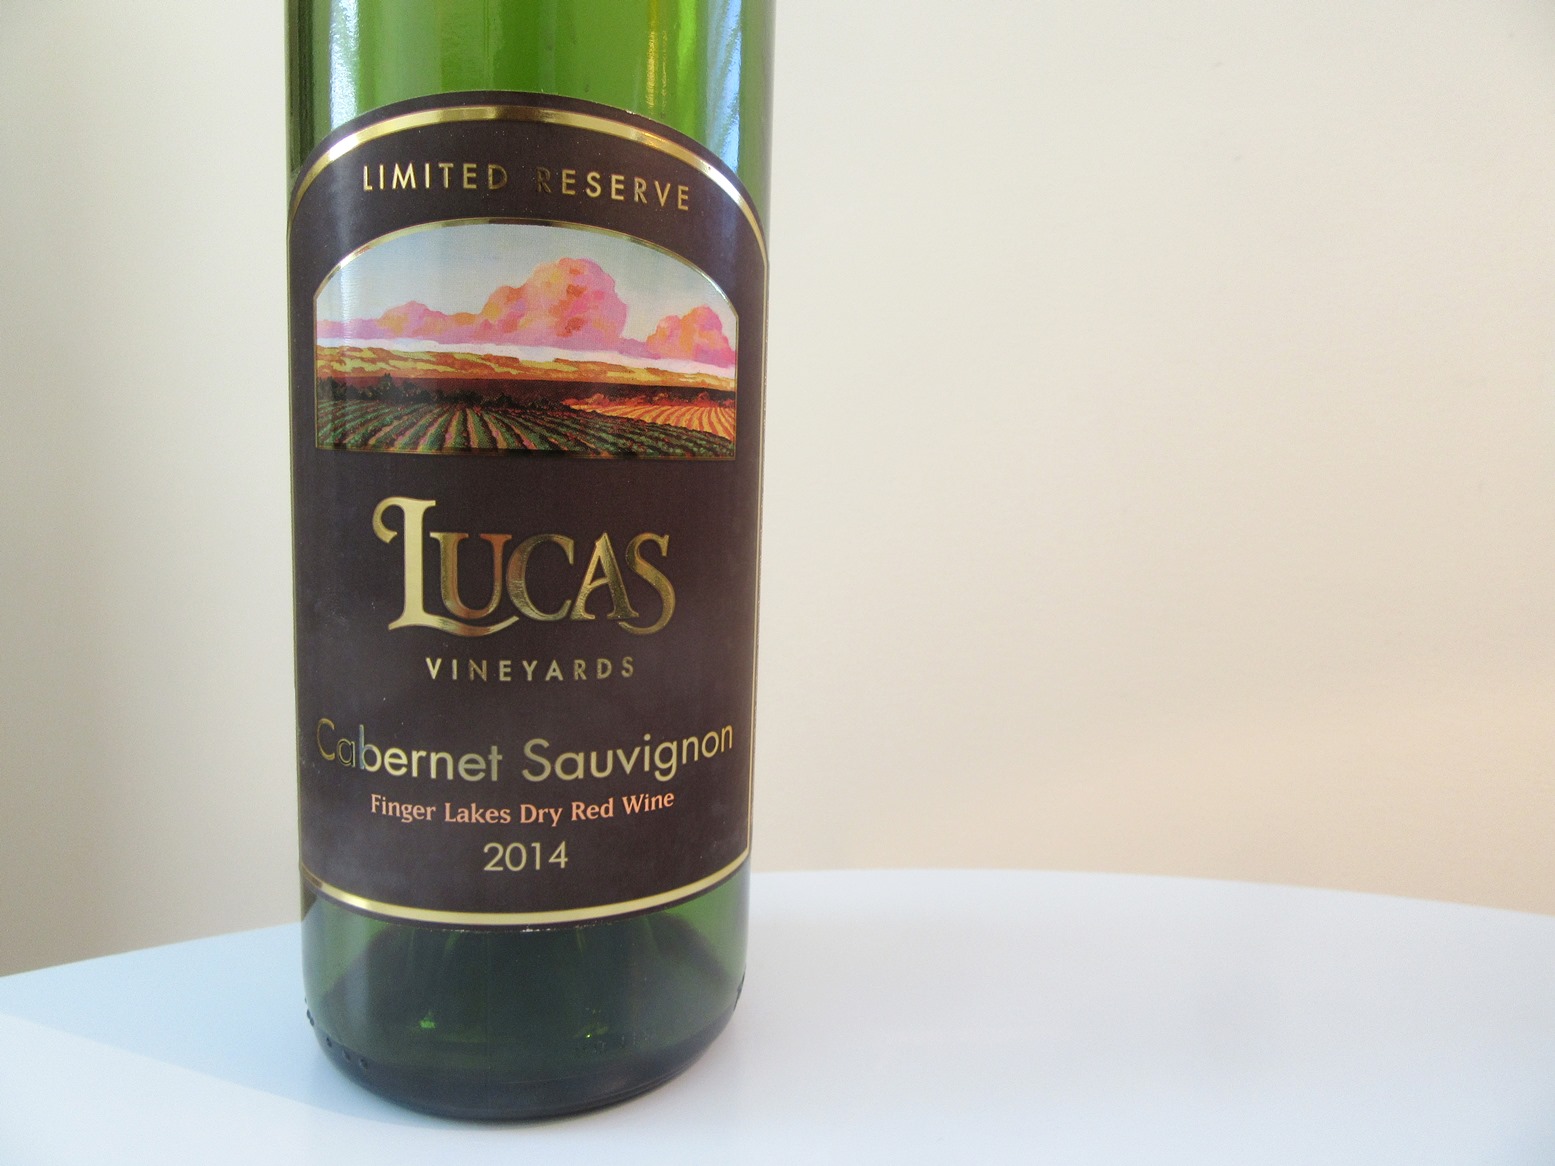 Lucas Vineyards, Limited Reserve Cabernet Sauvignon 2014, Finger Lakes, New York, Wine Casual